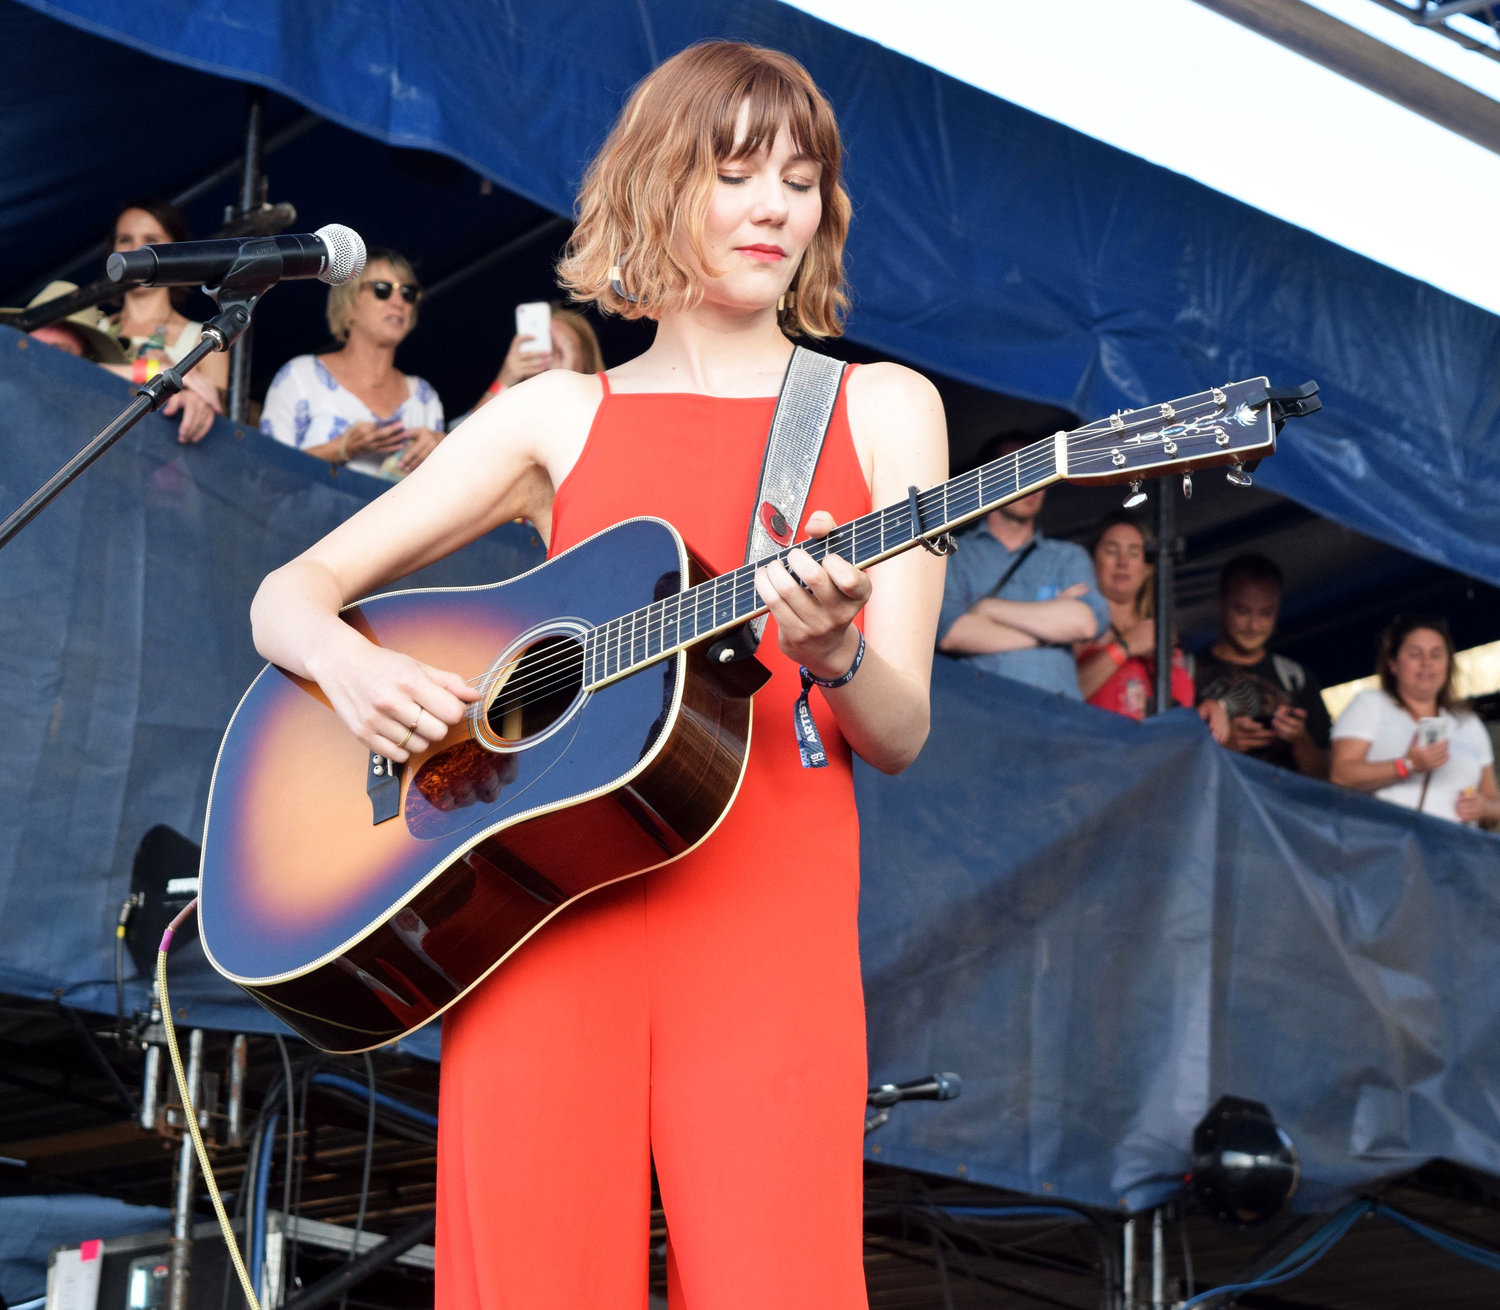 Molly Tuttle, a rising star in the bluegrass world, joined the all-woman "The Collaboration" during Saturday night's closing performance at the 2019 Newport Folk Festival.